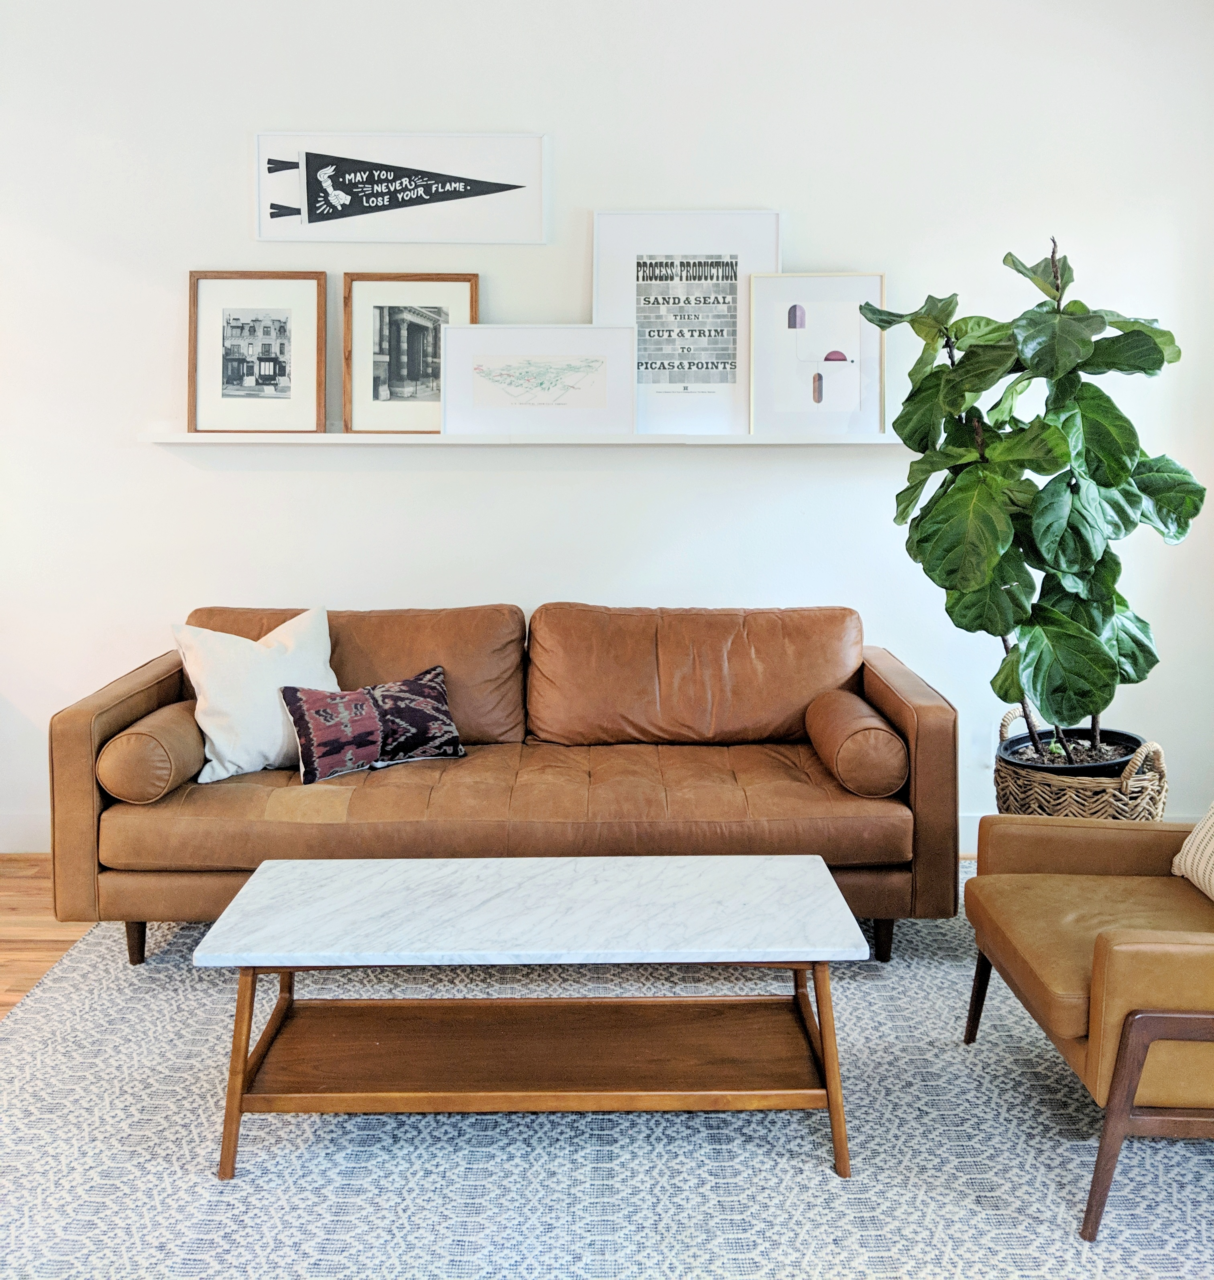 Midcentury Modern Decor Ideas: A couch with midcentury artwork above it